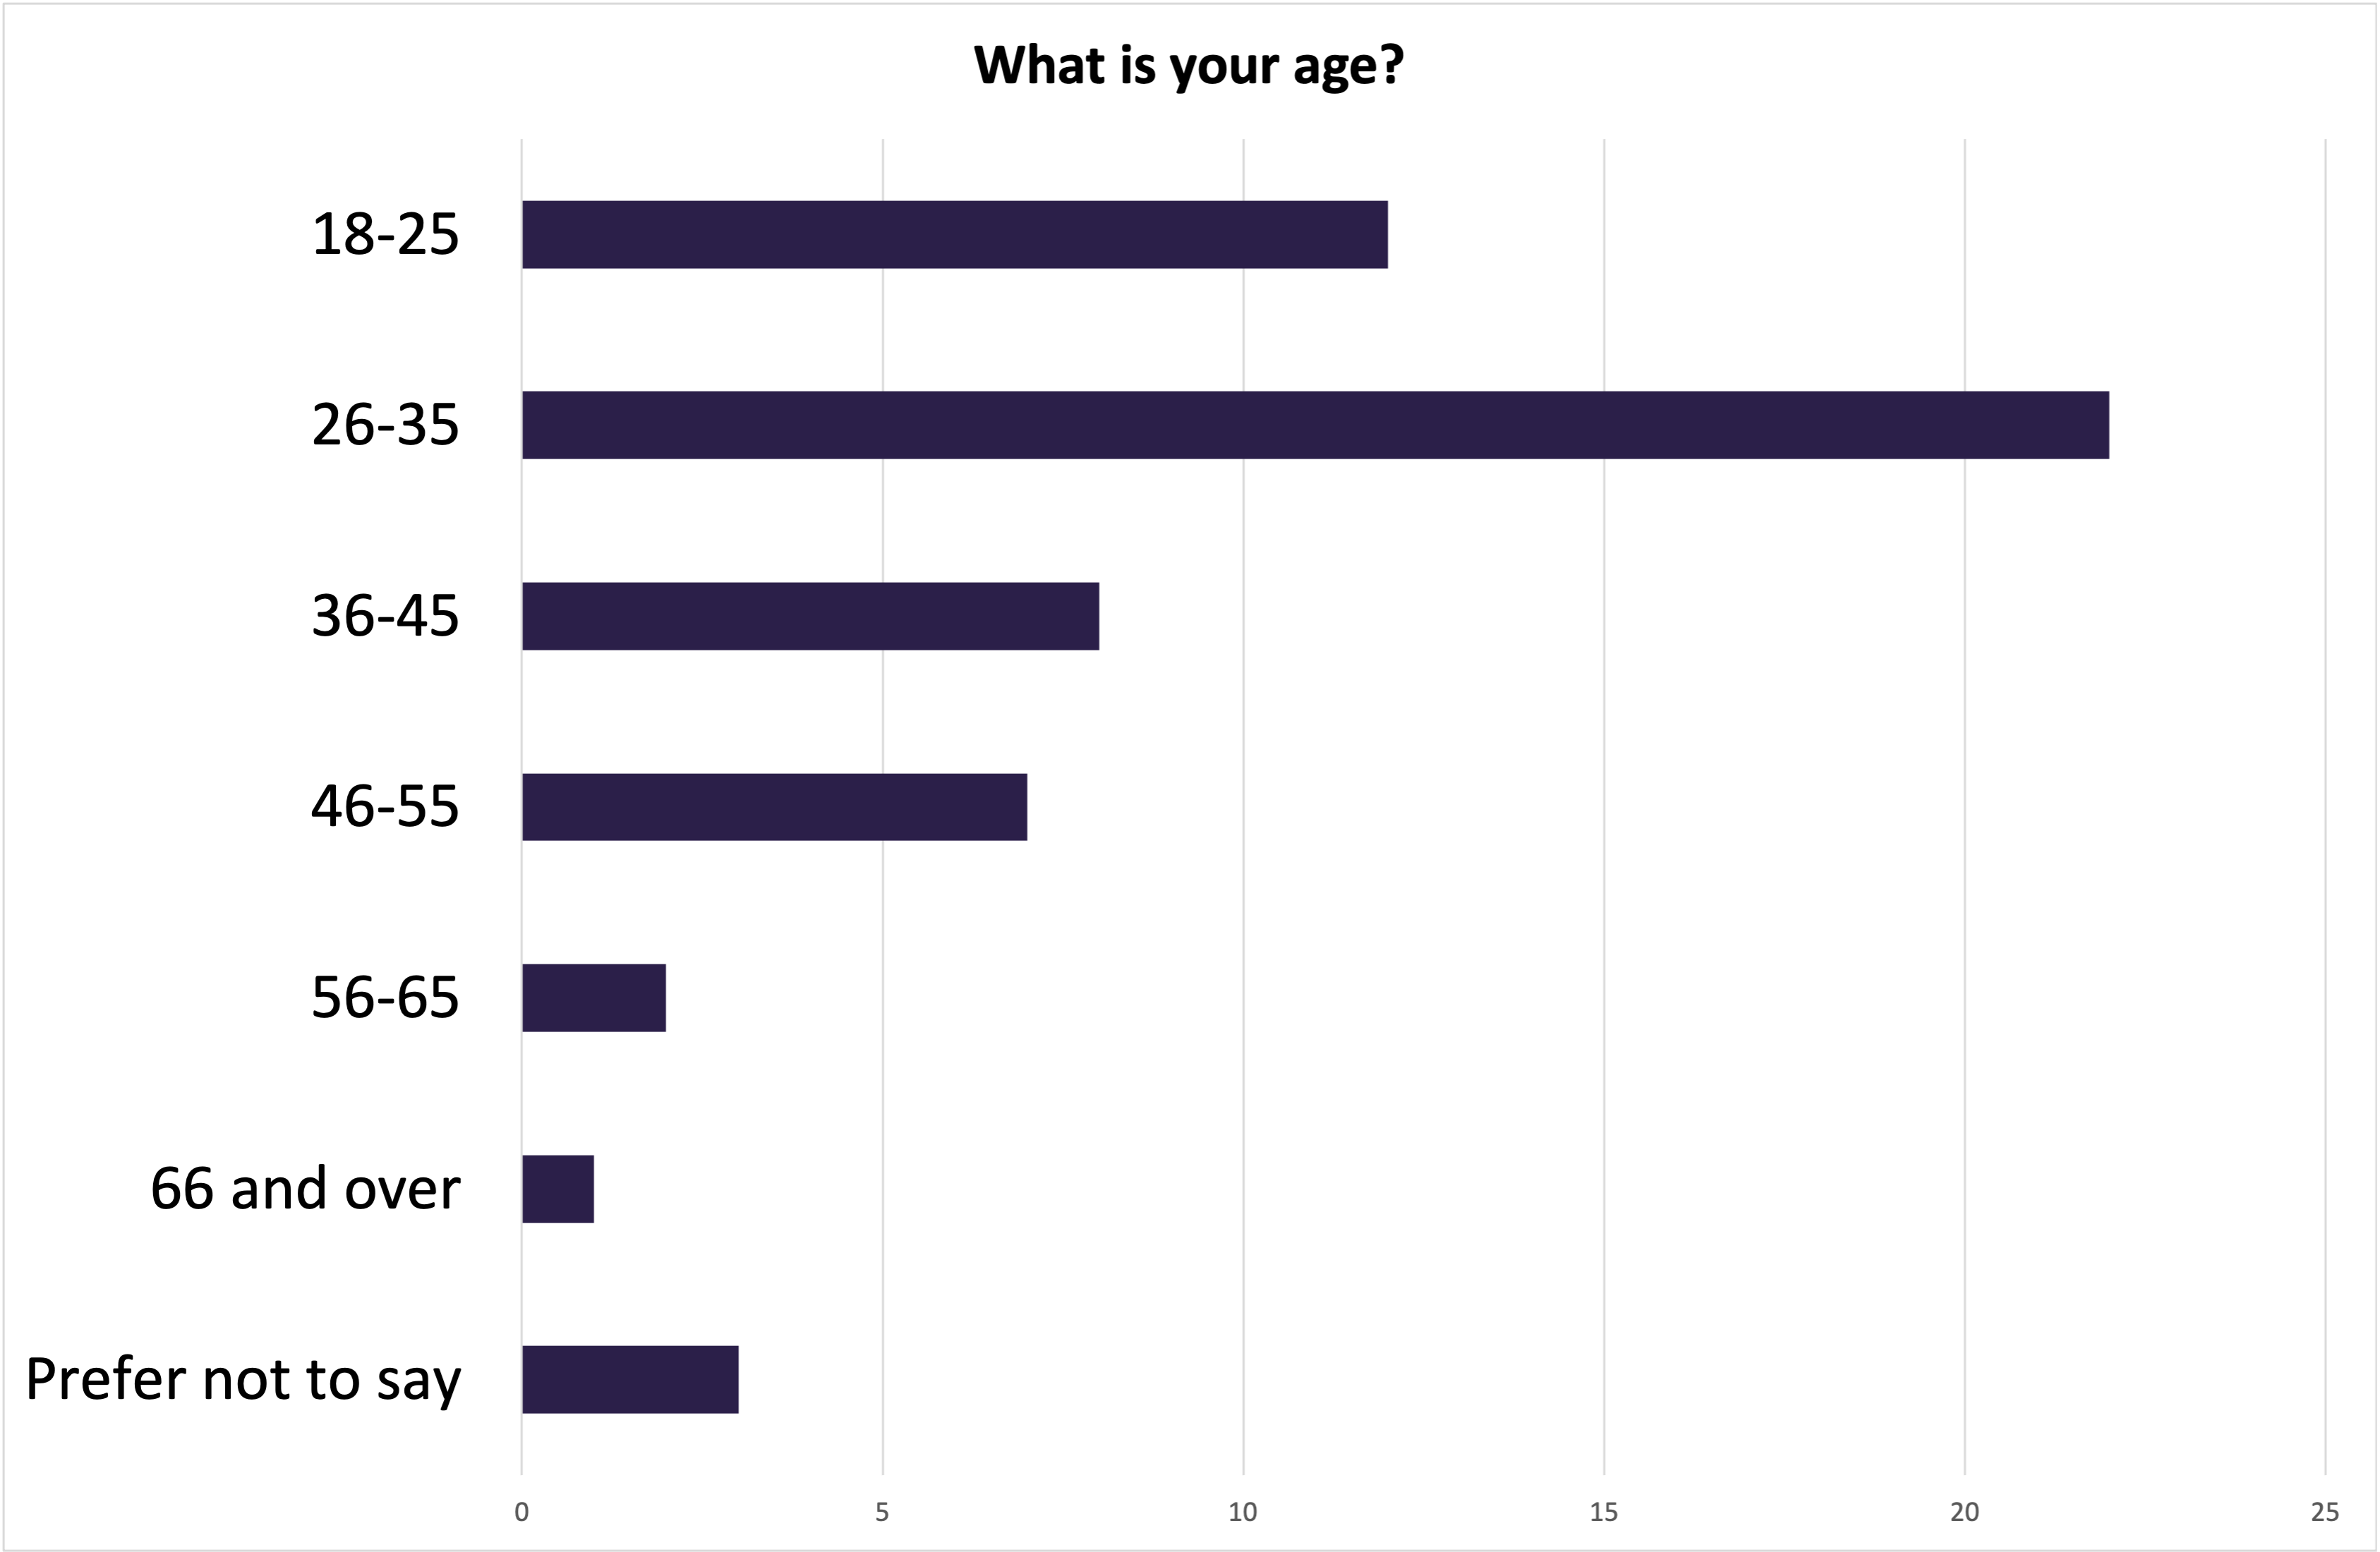 Bar chart of attendees' ages: 18-25 (12); 26-35 (22); 36-45 (8); 46-55 (7); 56-65 (2); 66 and over (1); Prefer not to say (3)